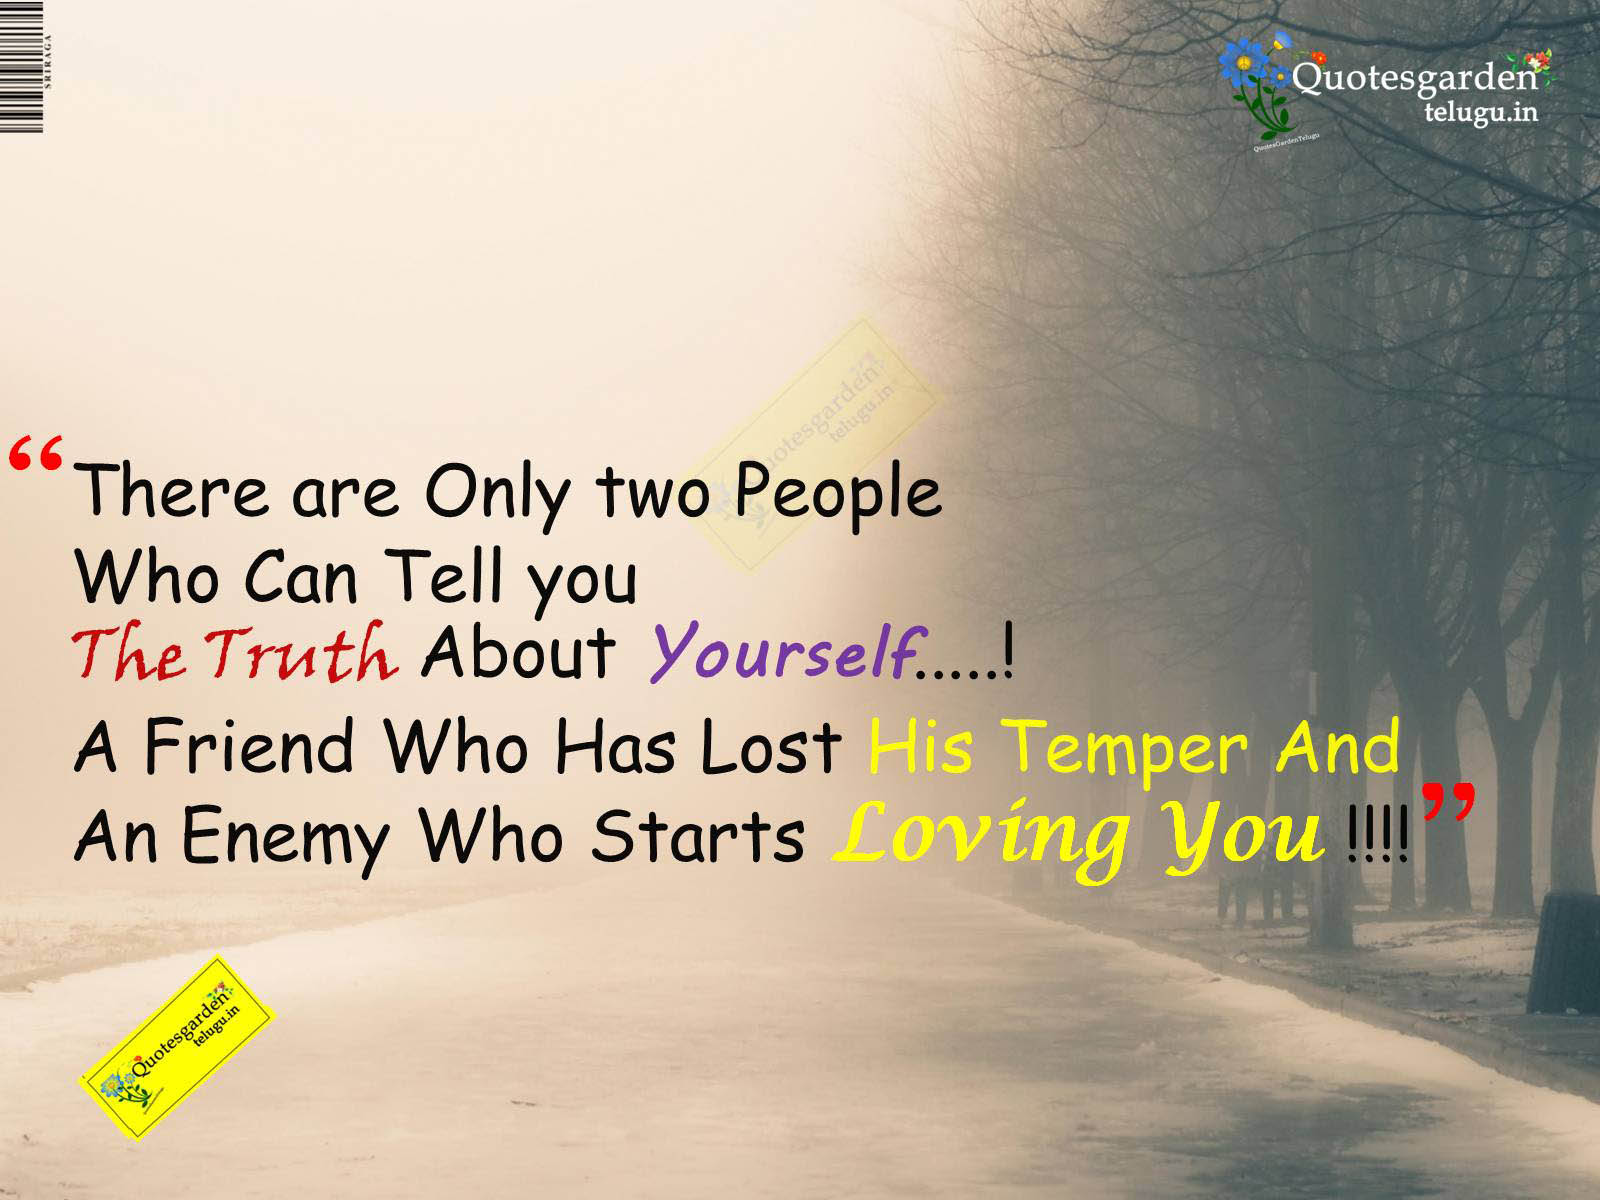 Latest quotes about life Friend and enemy quotations Best inspirational quotes to know who